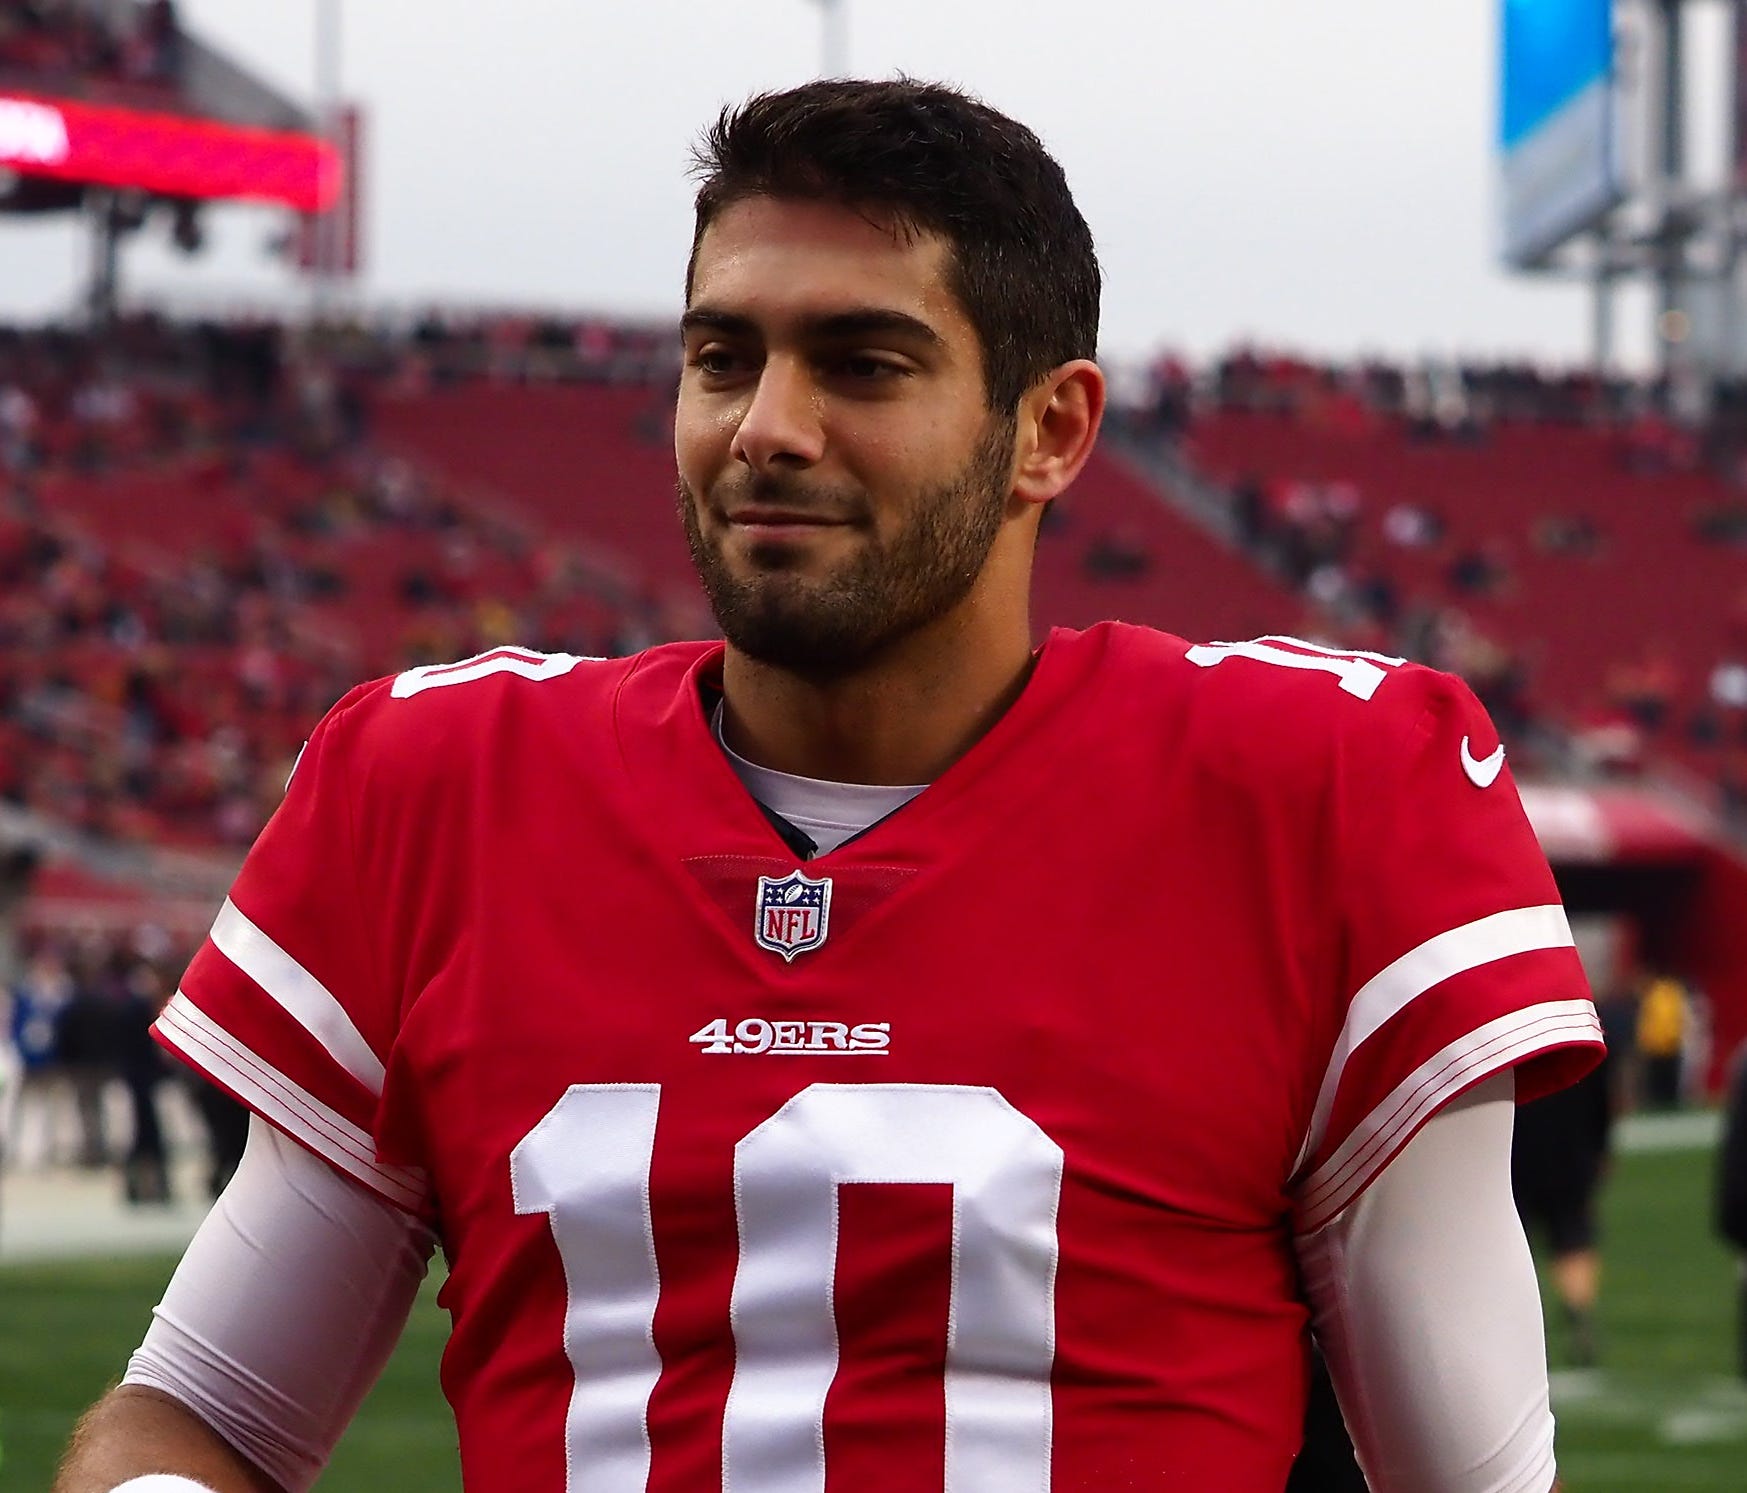 San Francisco 49ers quarterback Jimmy Garoppolo (10) walks to the sideline before a game against the Jacksonville Jaguars at Levi's Stadium.